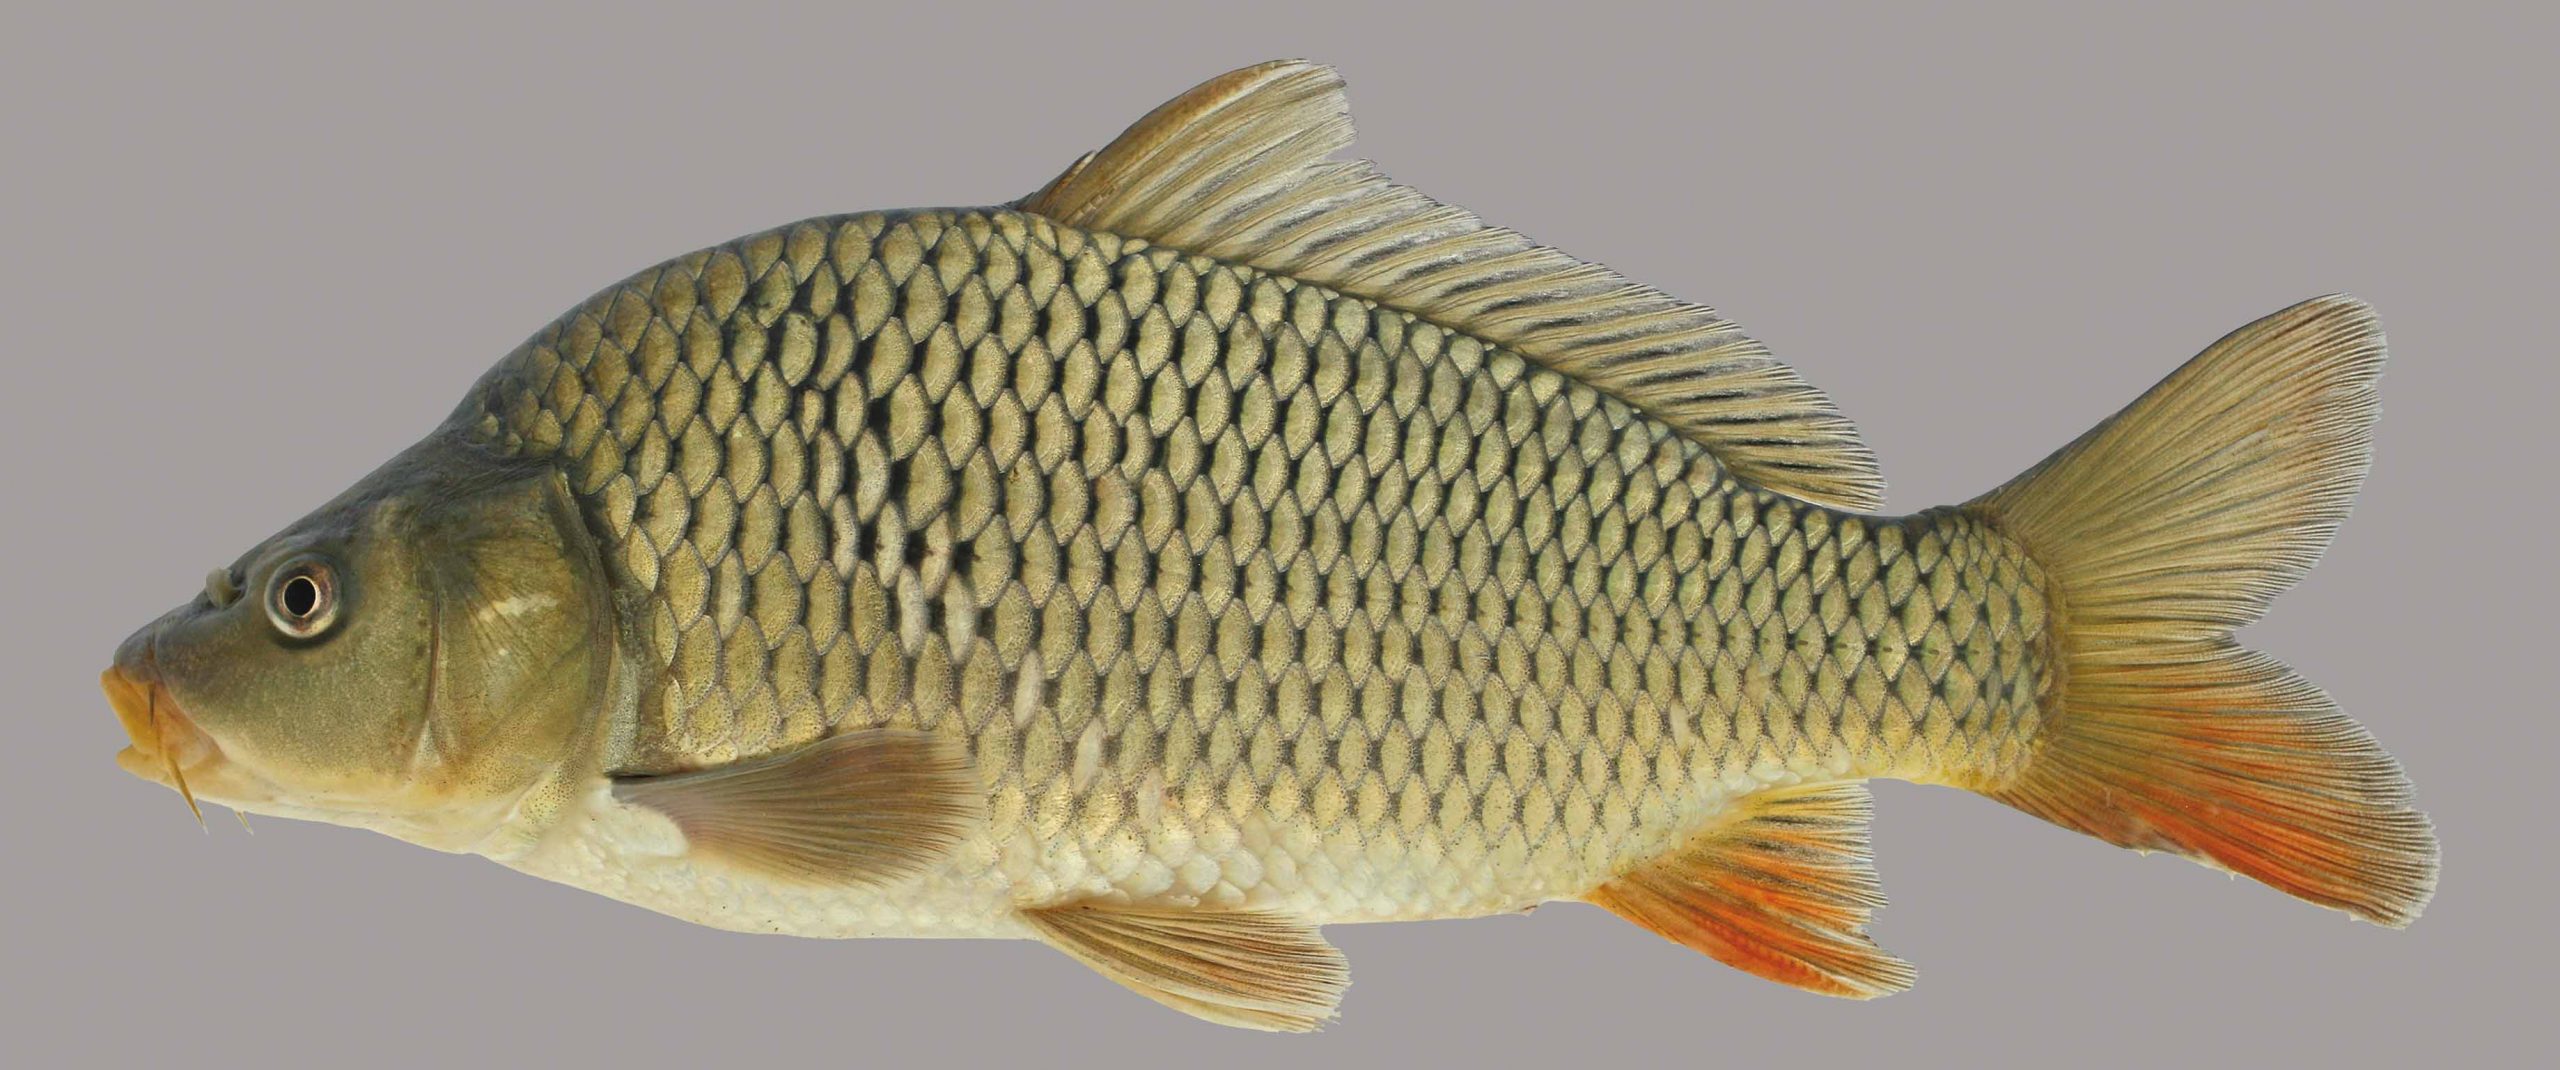 Lateral view of a common carp